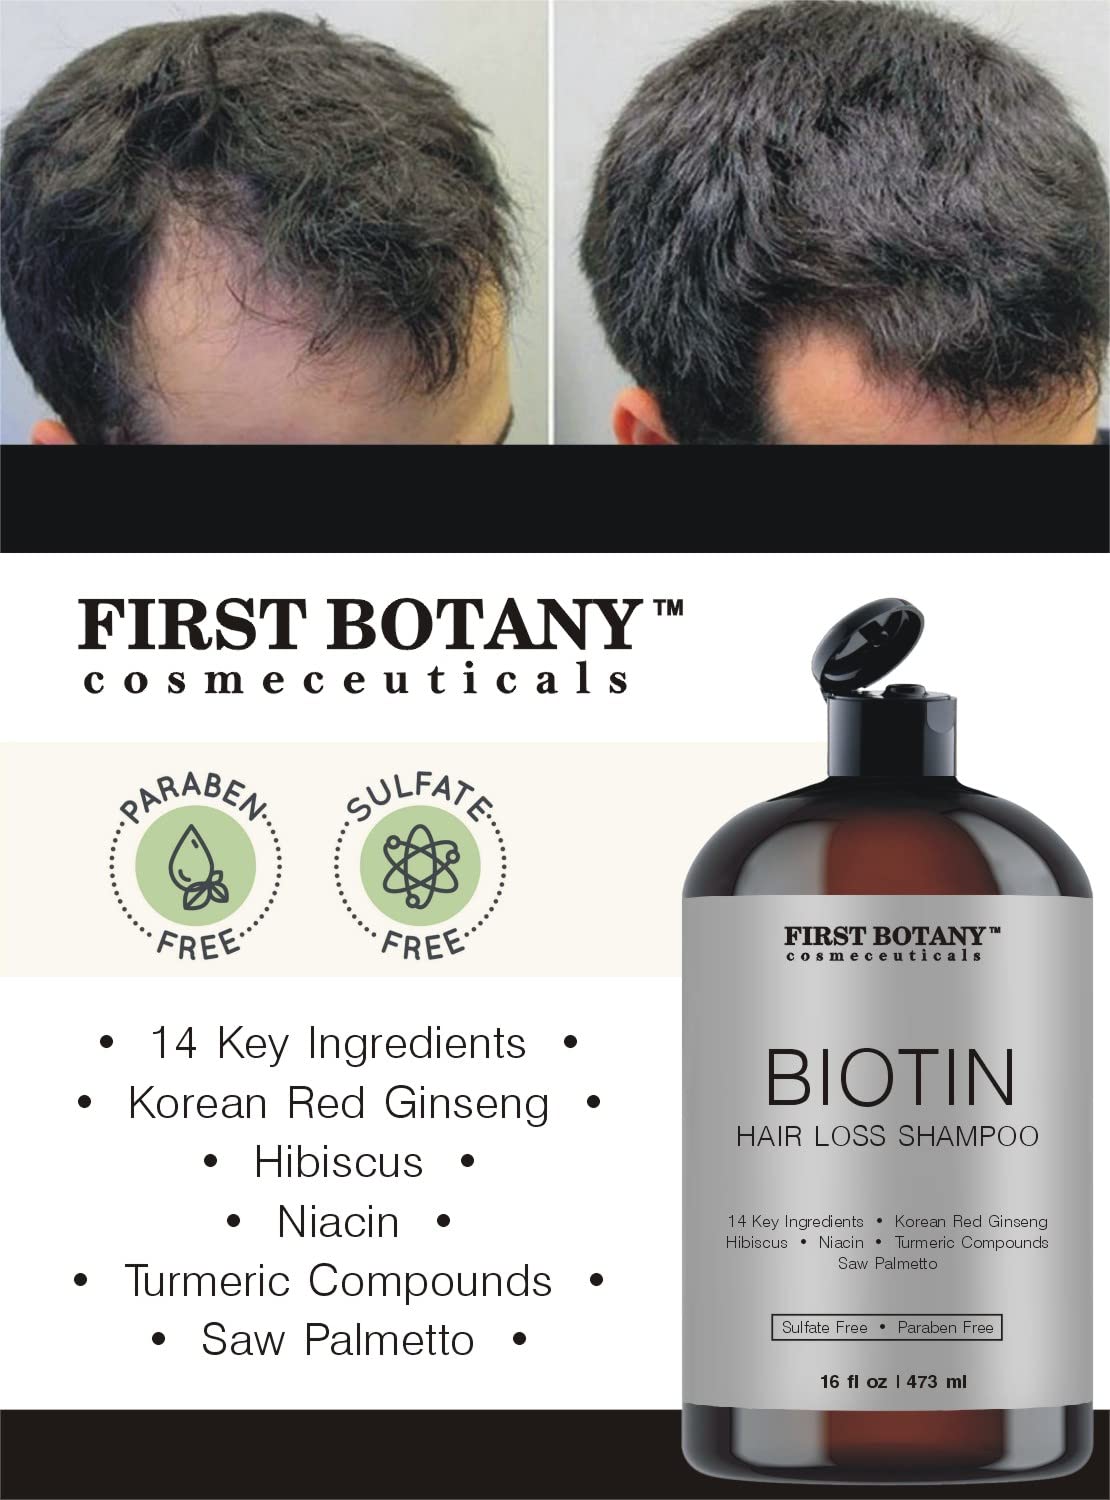 The Role of BVitamins in Hair Growth